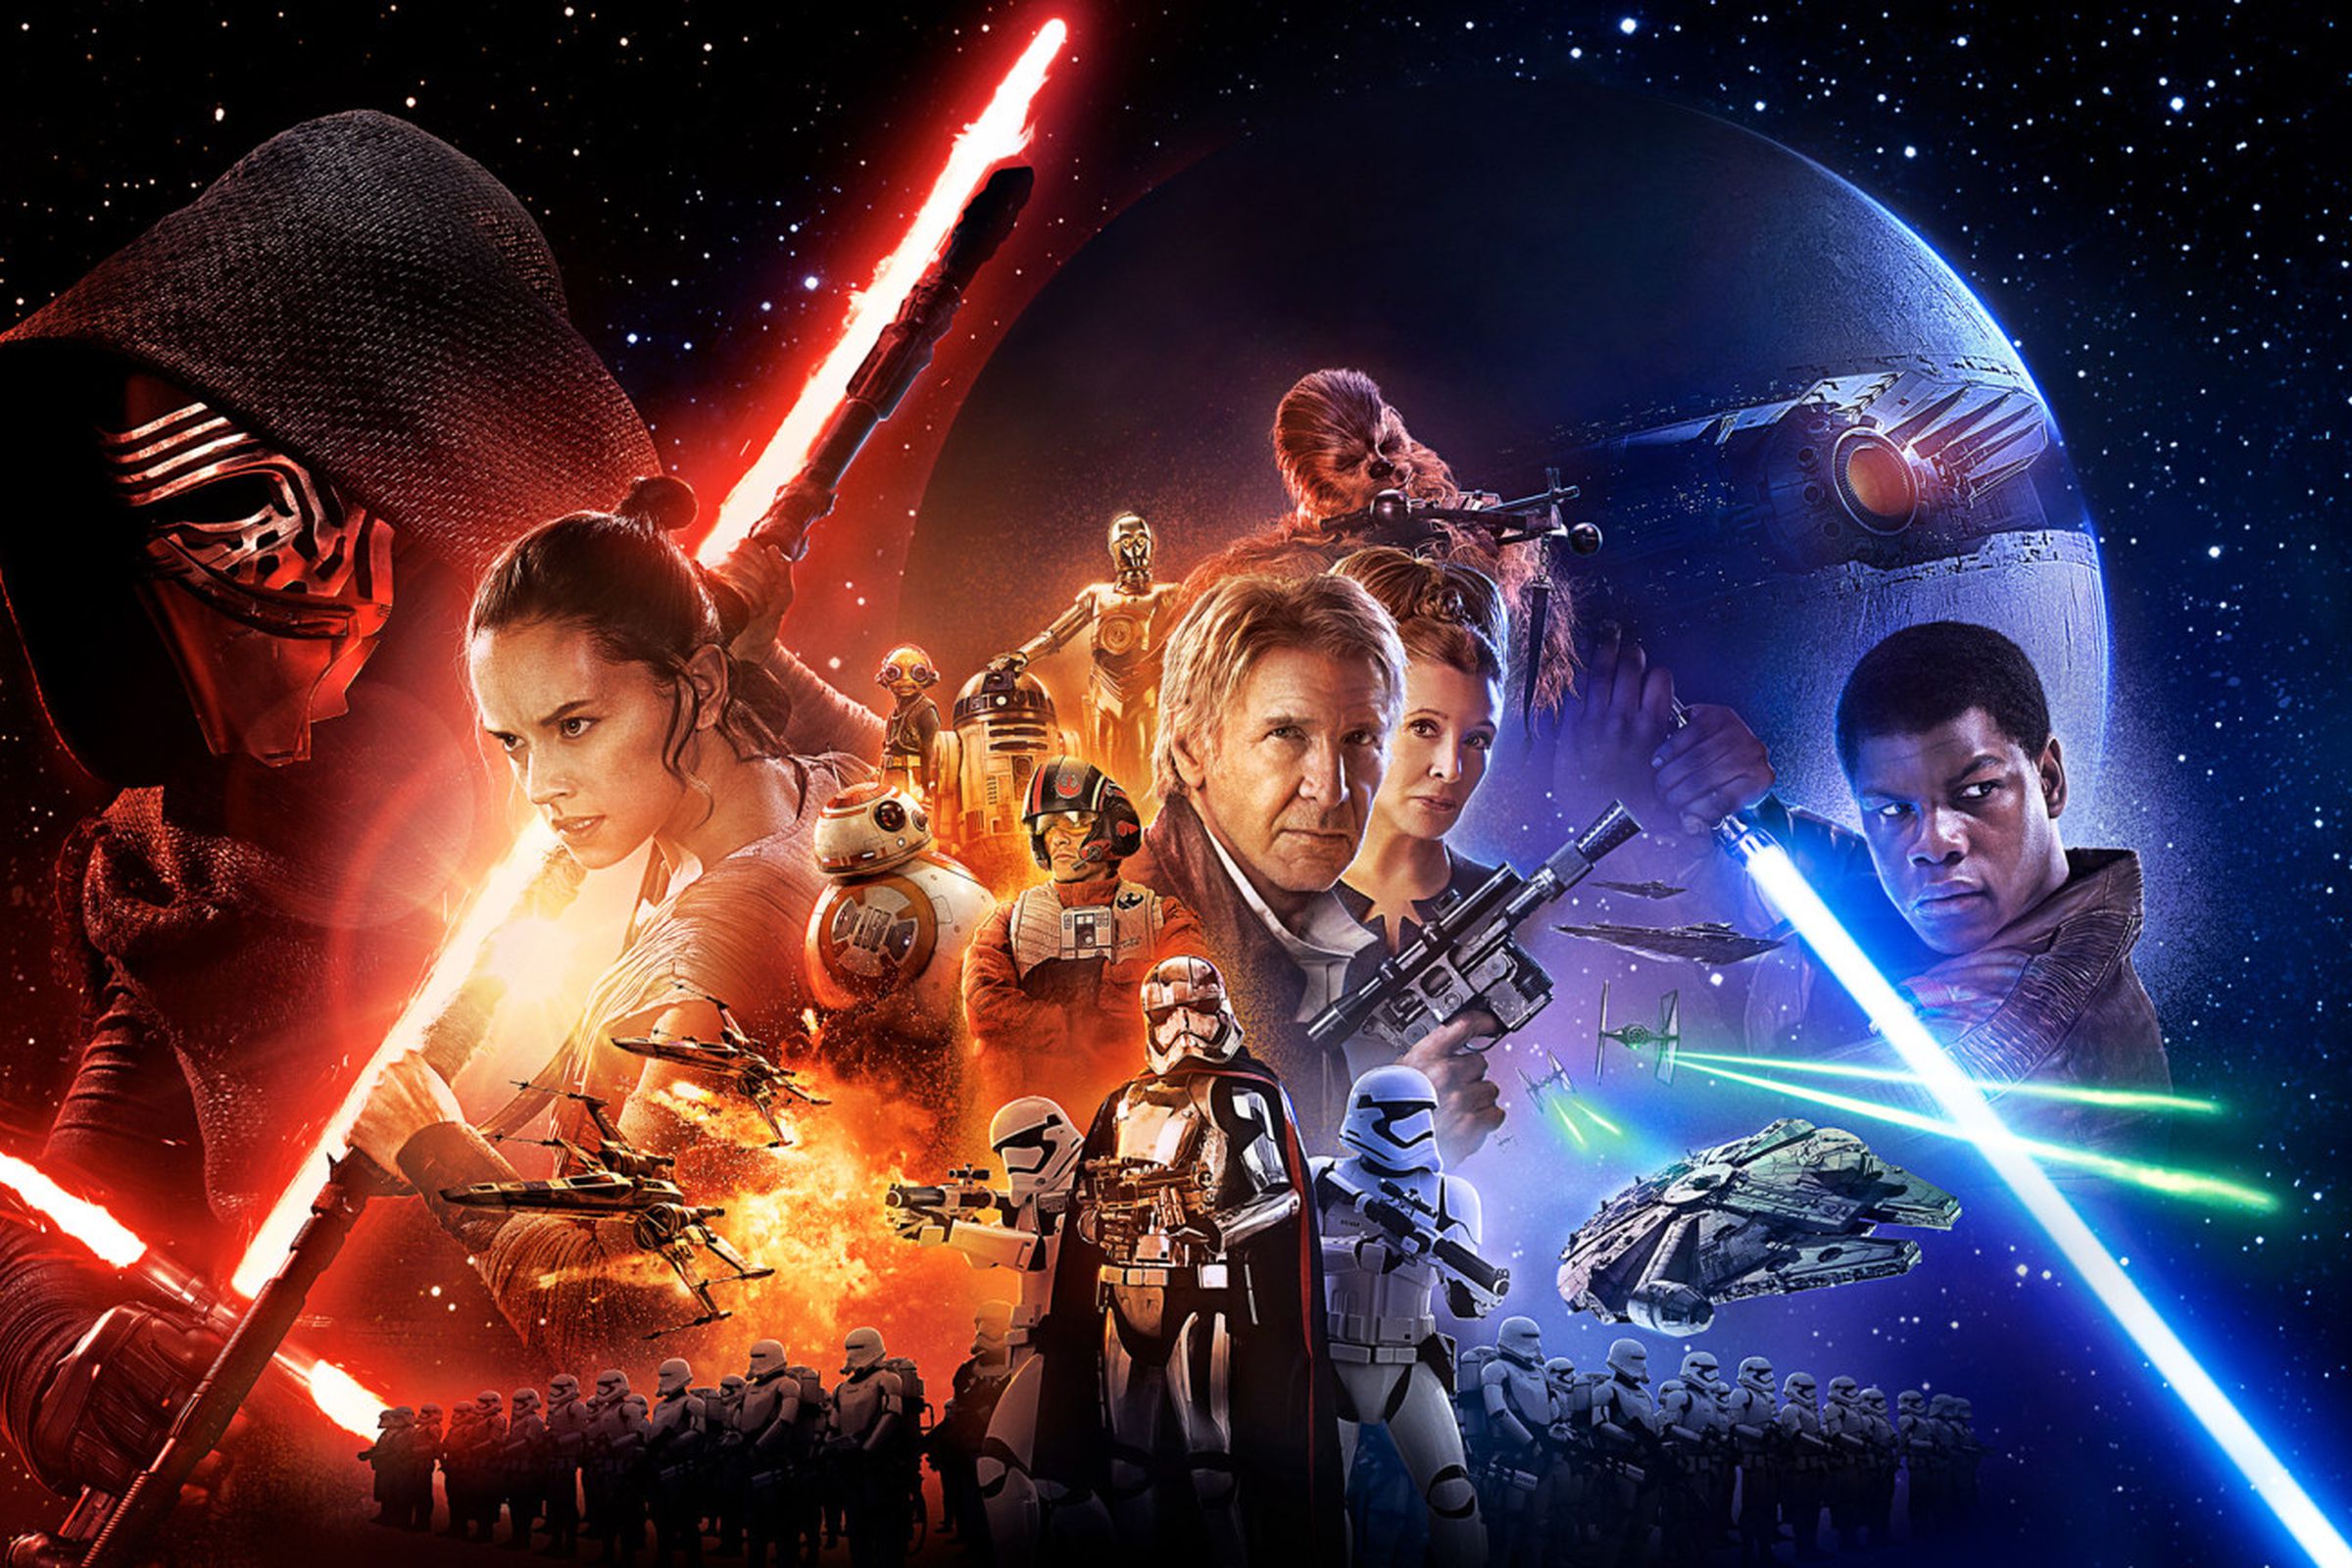 Star Wars: The Force Awakens poster (wide)